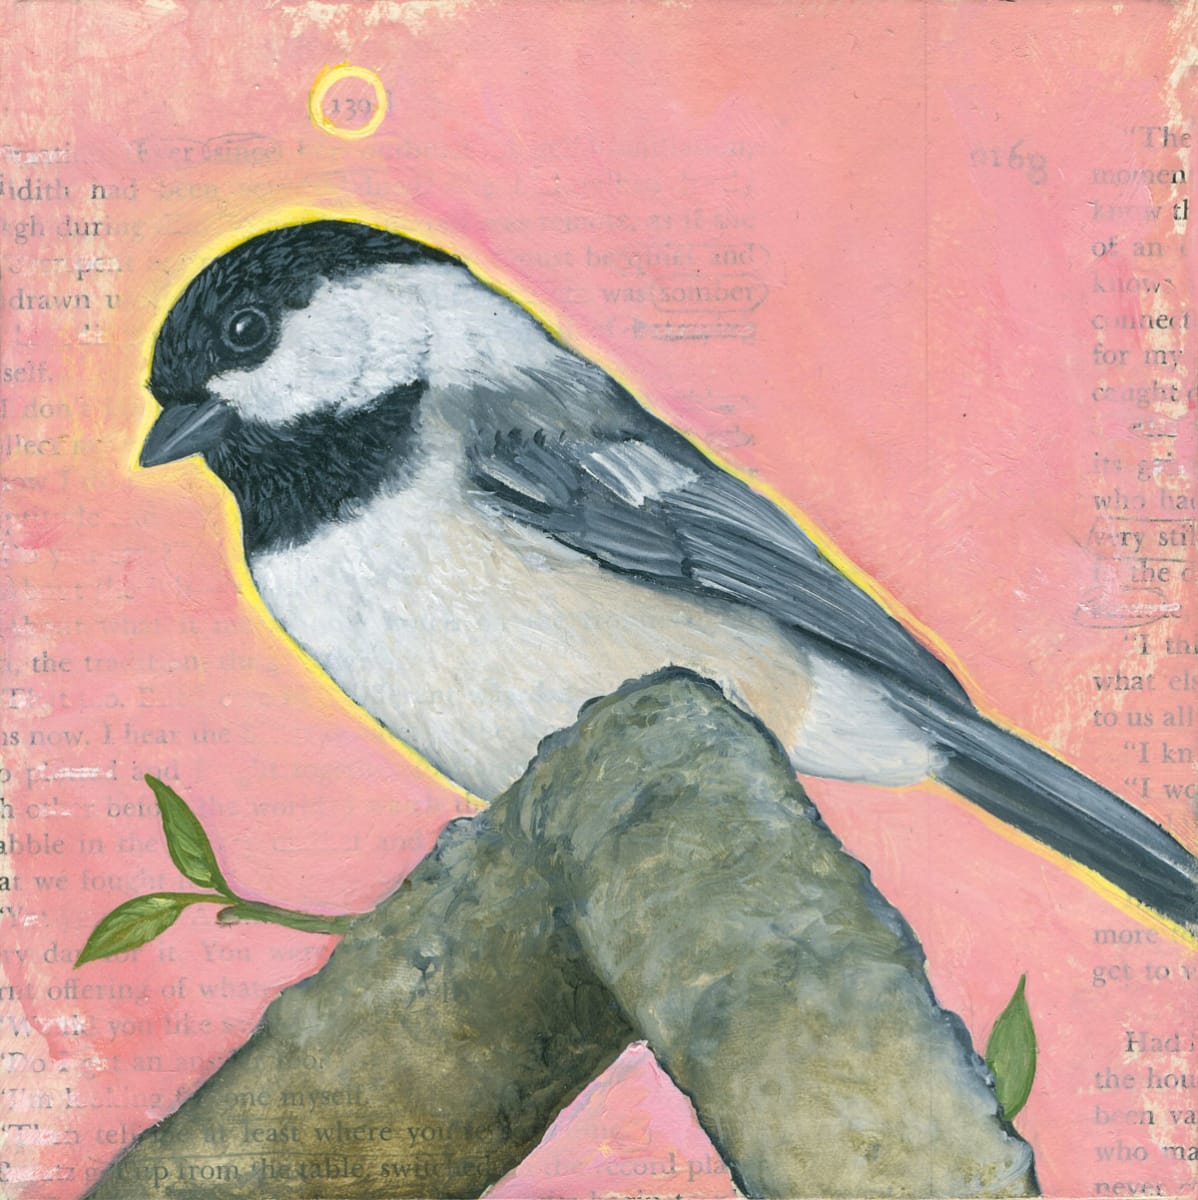 where you're searching by bryan holland arts  Image: One of my favorite ways of working is to begin with collage material on panel, then begin adding layers of paint along with the subject I'm painting. Here I've used pages from an old book, and highlighted certain words. The chickadee pictured here was one that I photographed in my backyard.